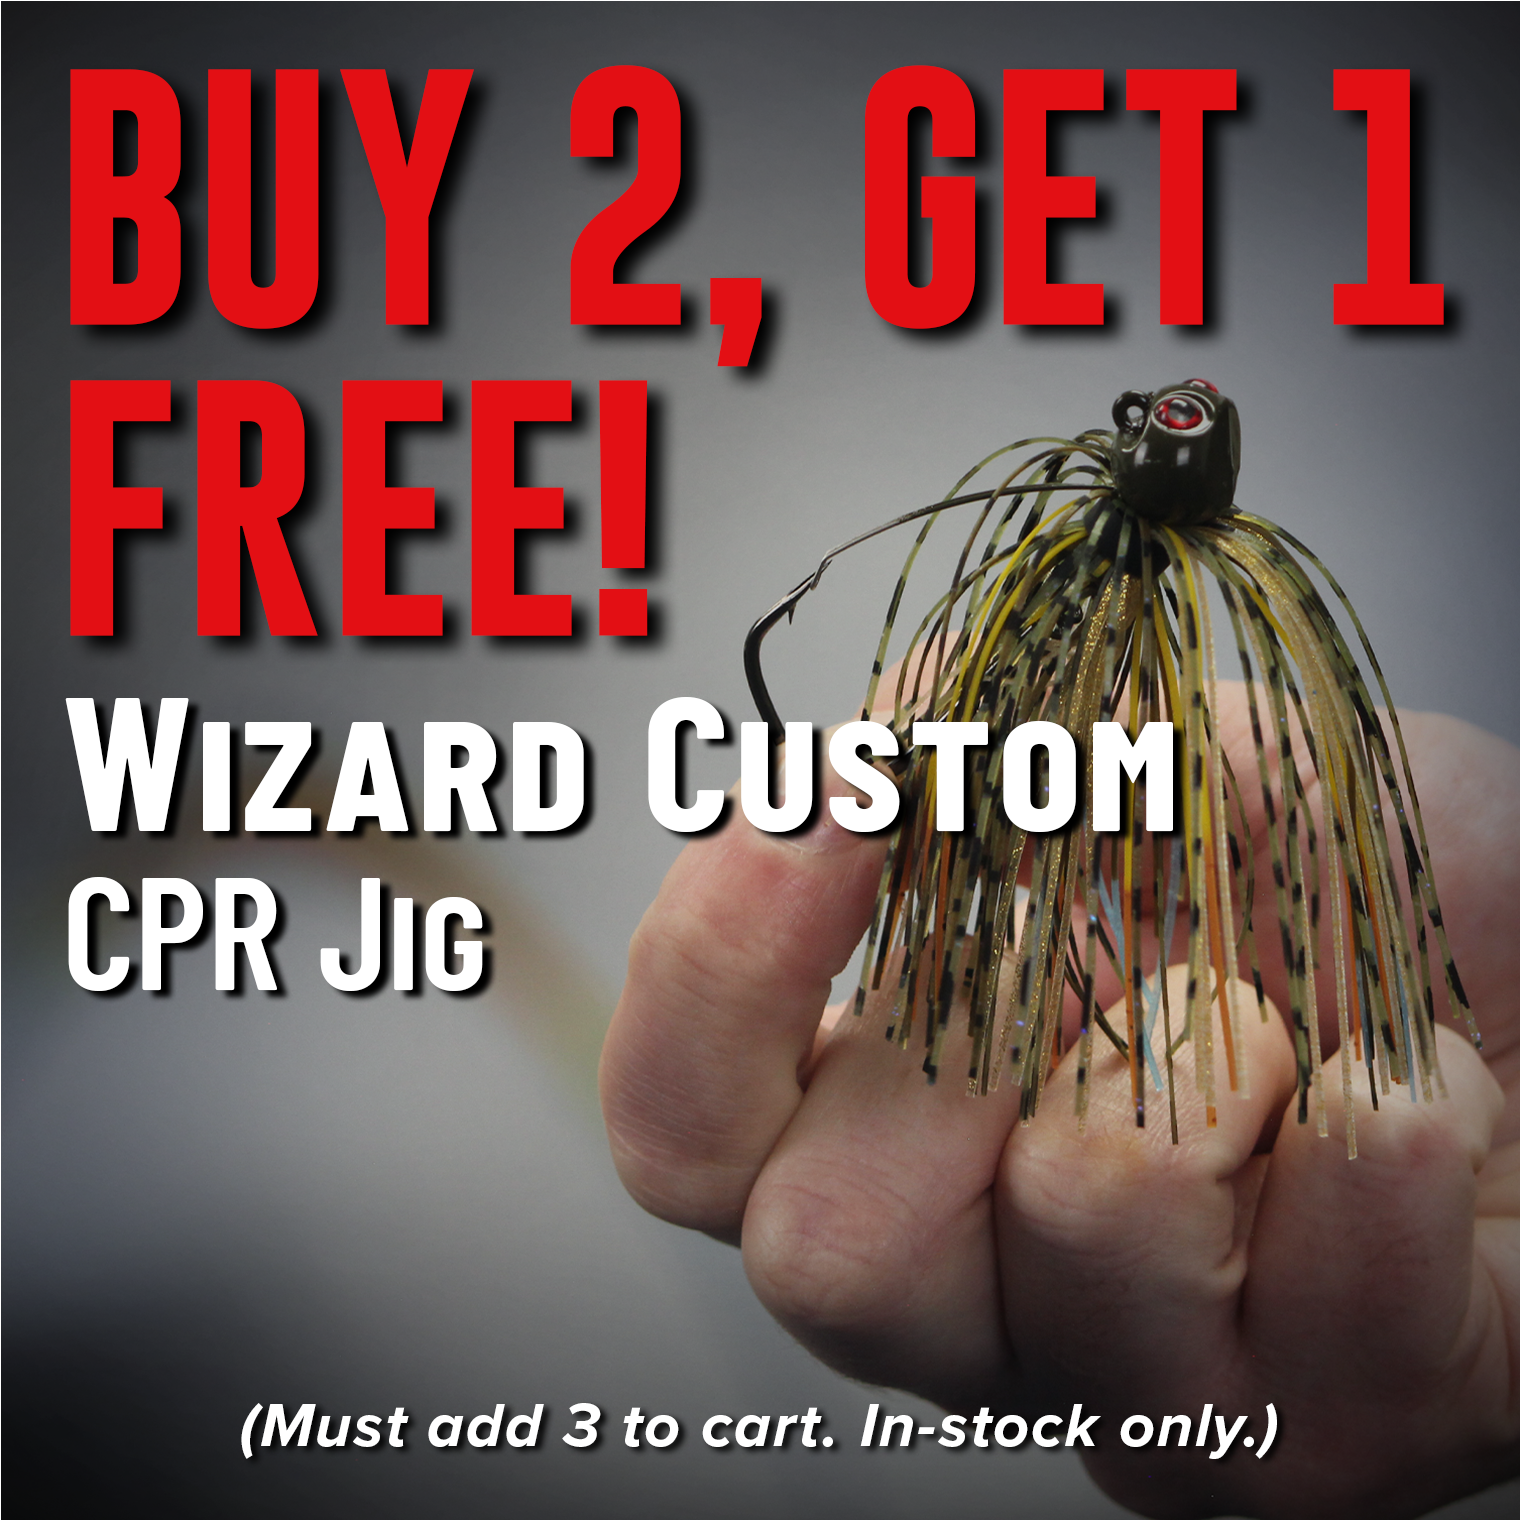 Buy 2, Get 1 Free! Wizard Custom CPR Jig (Must add 3 to cart. In-stock only.)